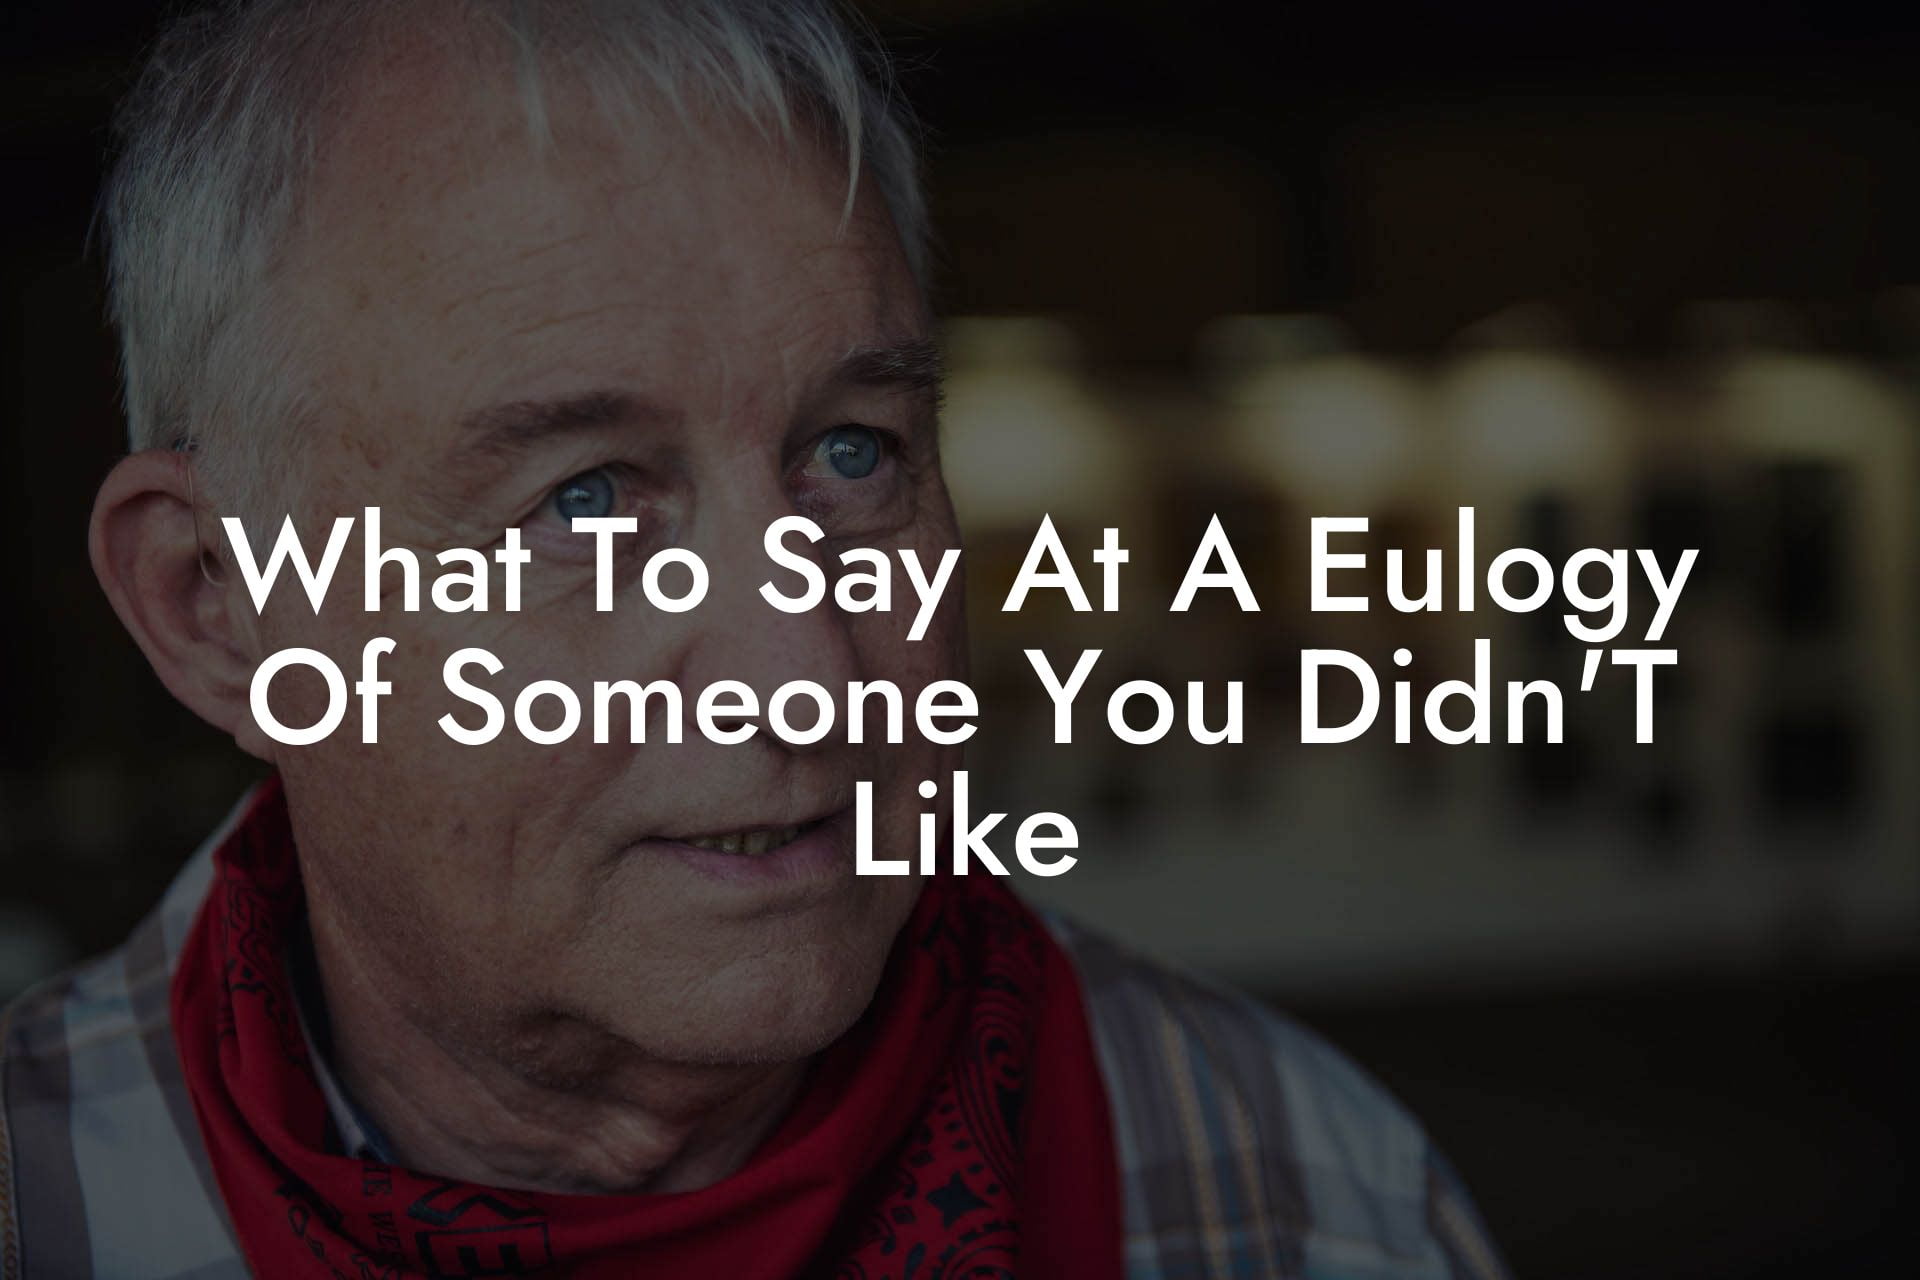 What To Say At A Eulogy Of Someone You Didn'T Like